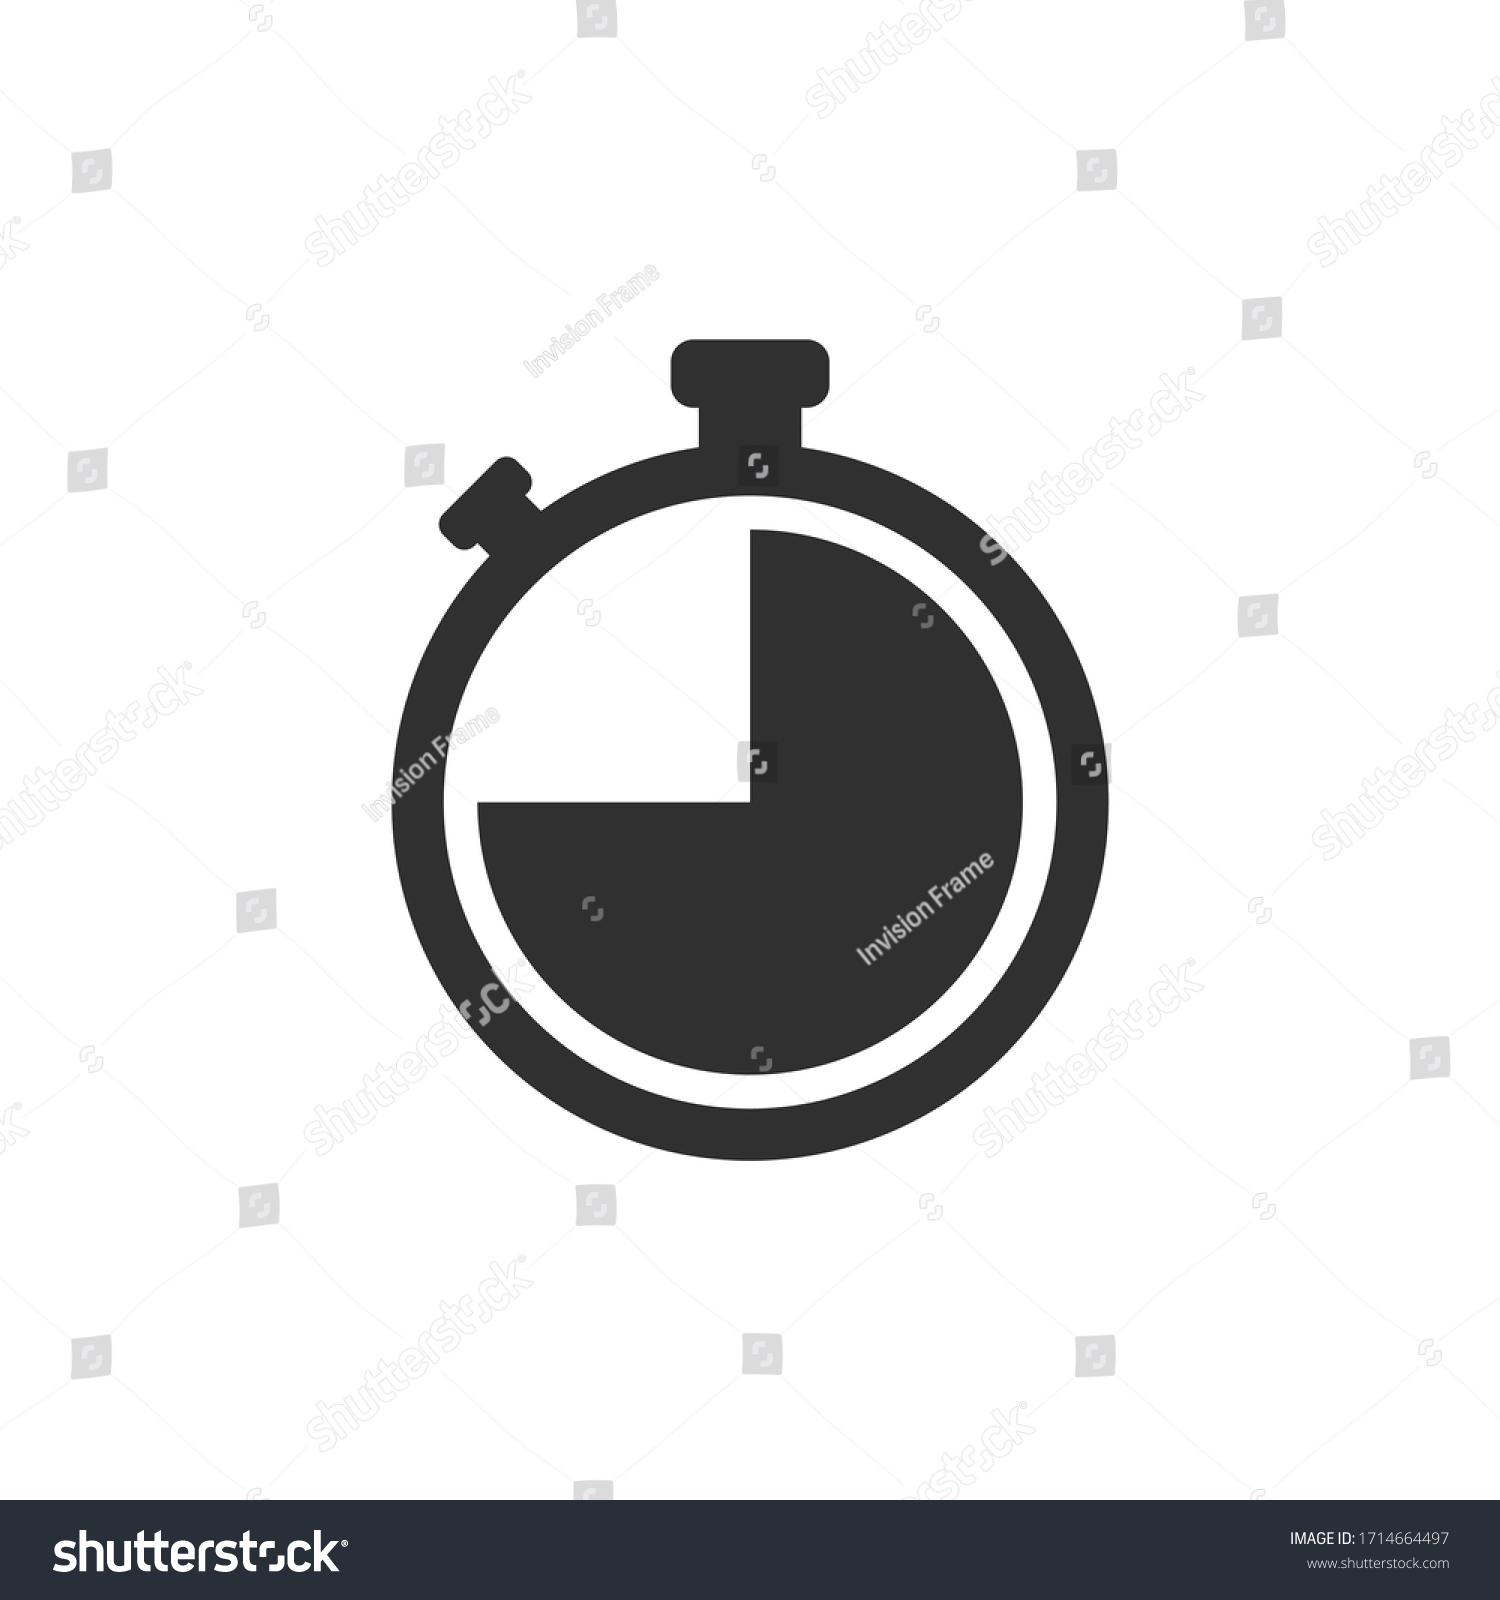 Stopwatch icon, logo. Chronometer, timer sign. Stopwatch icon isolated on white background. Vector illustration #1714664497